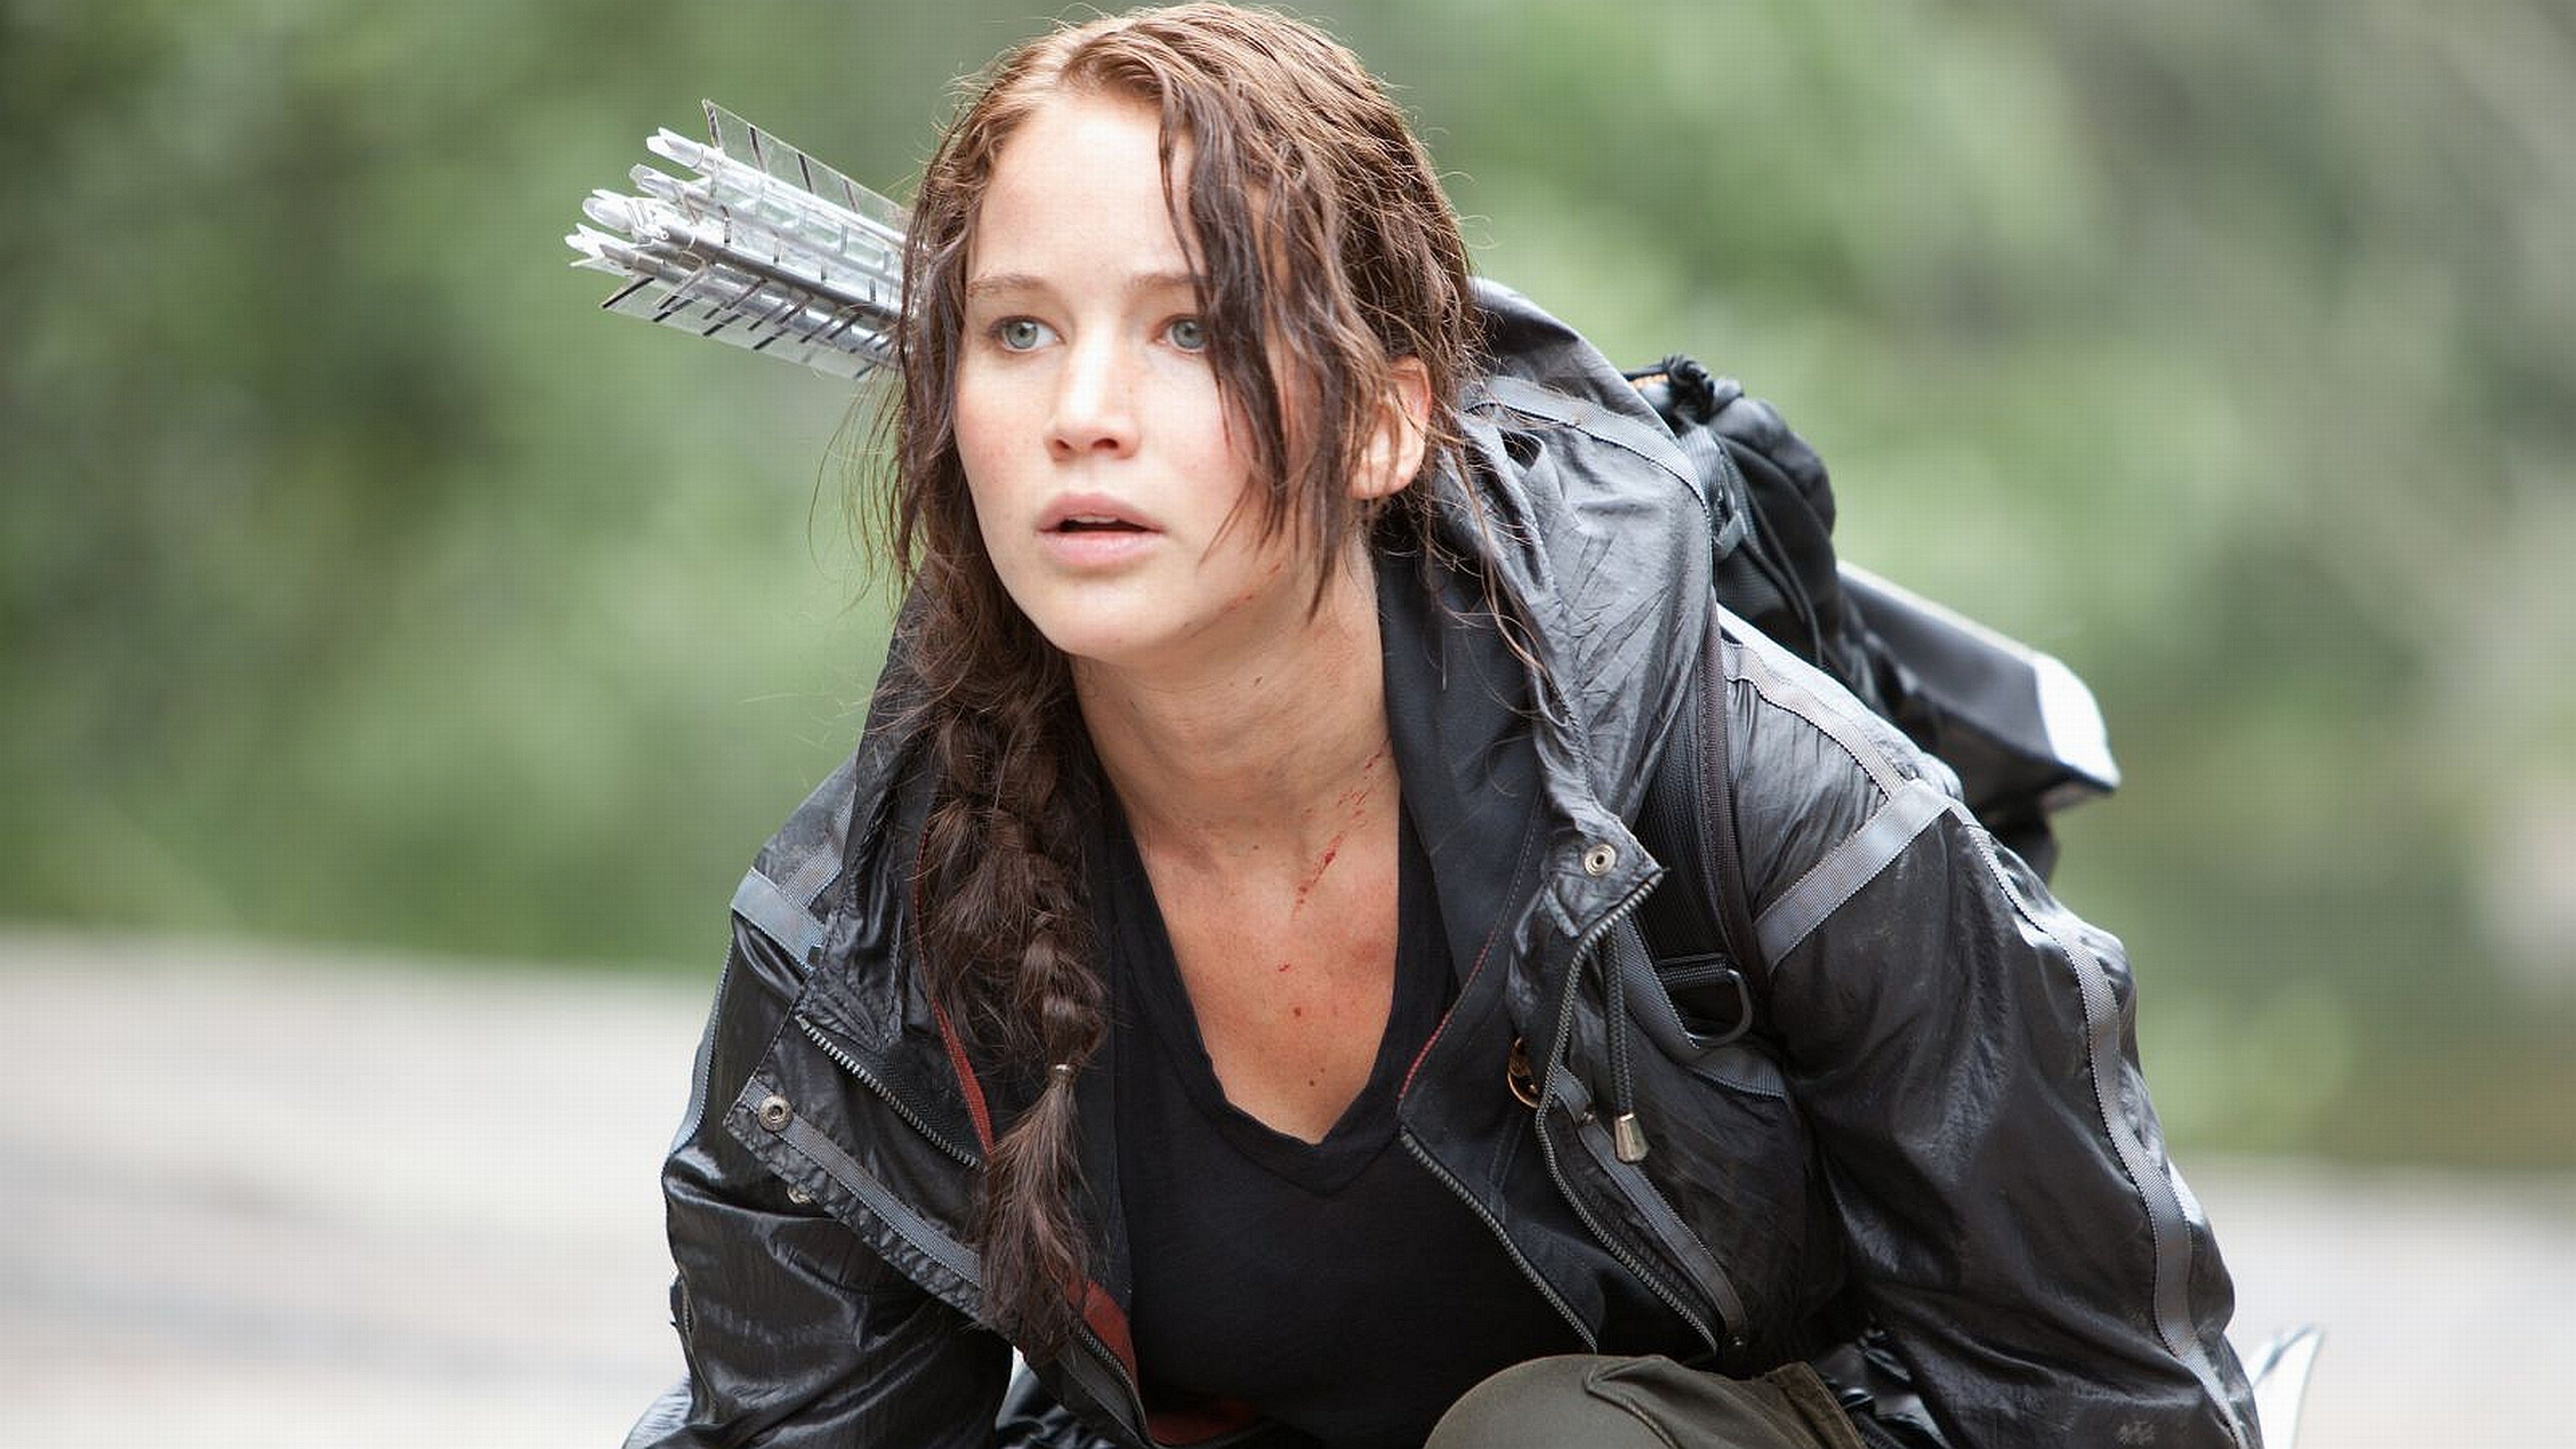 Hunger Games: Katniss Everdeen, known as "the girl on fire", The main protagonist. 3840x2160 4K Wallpaper.